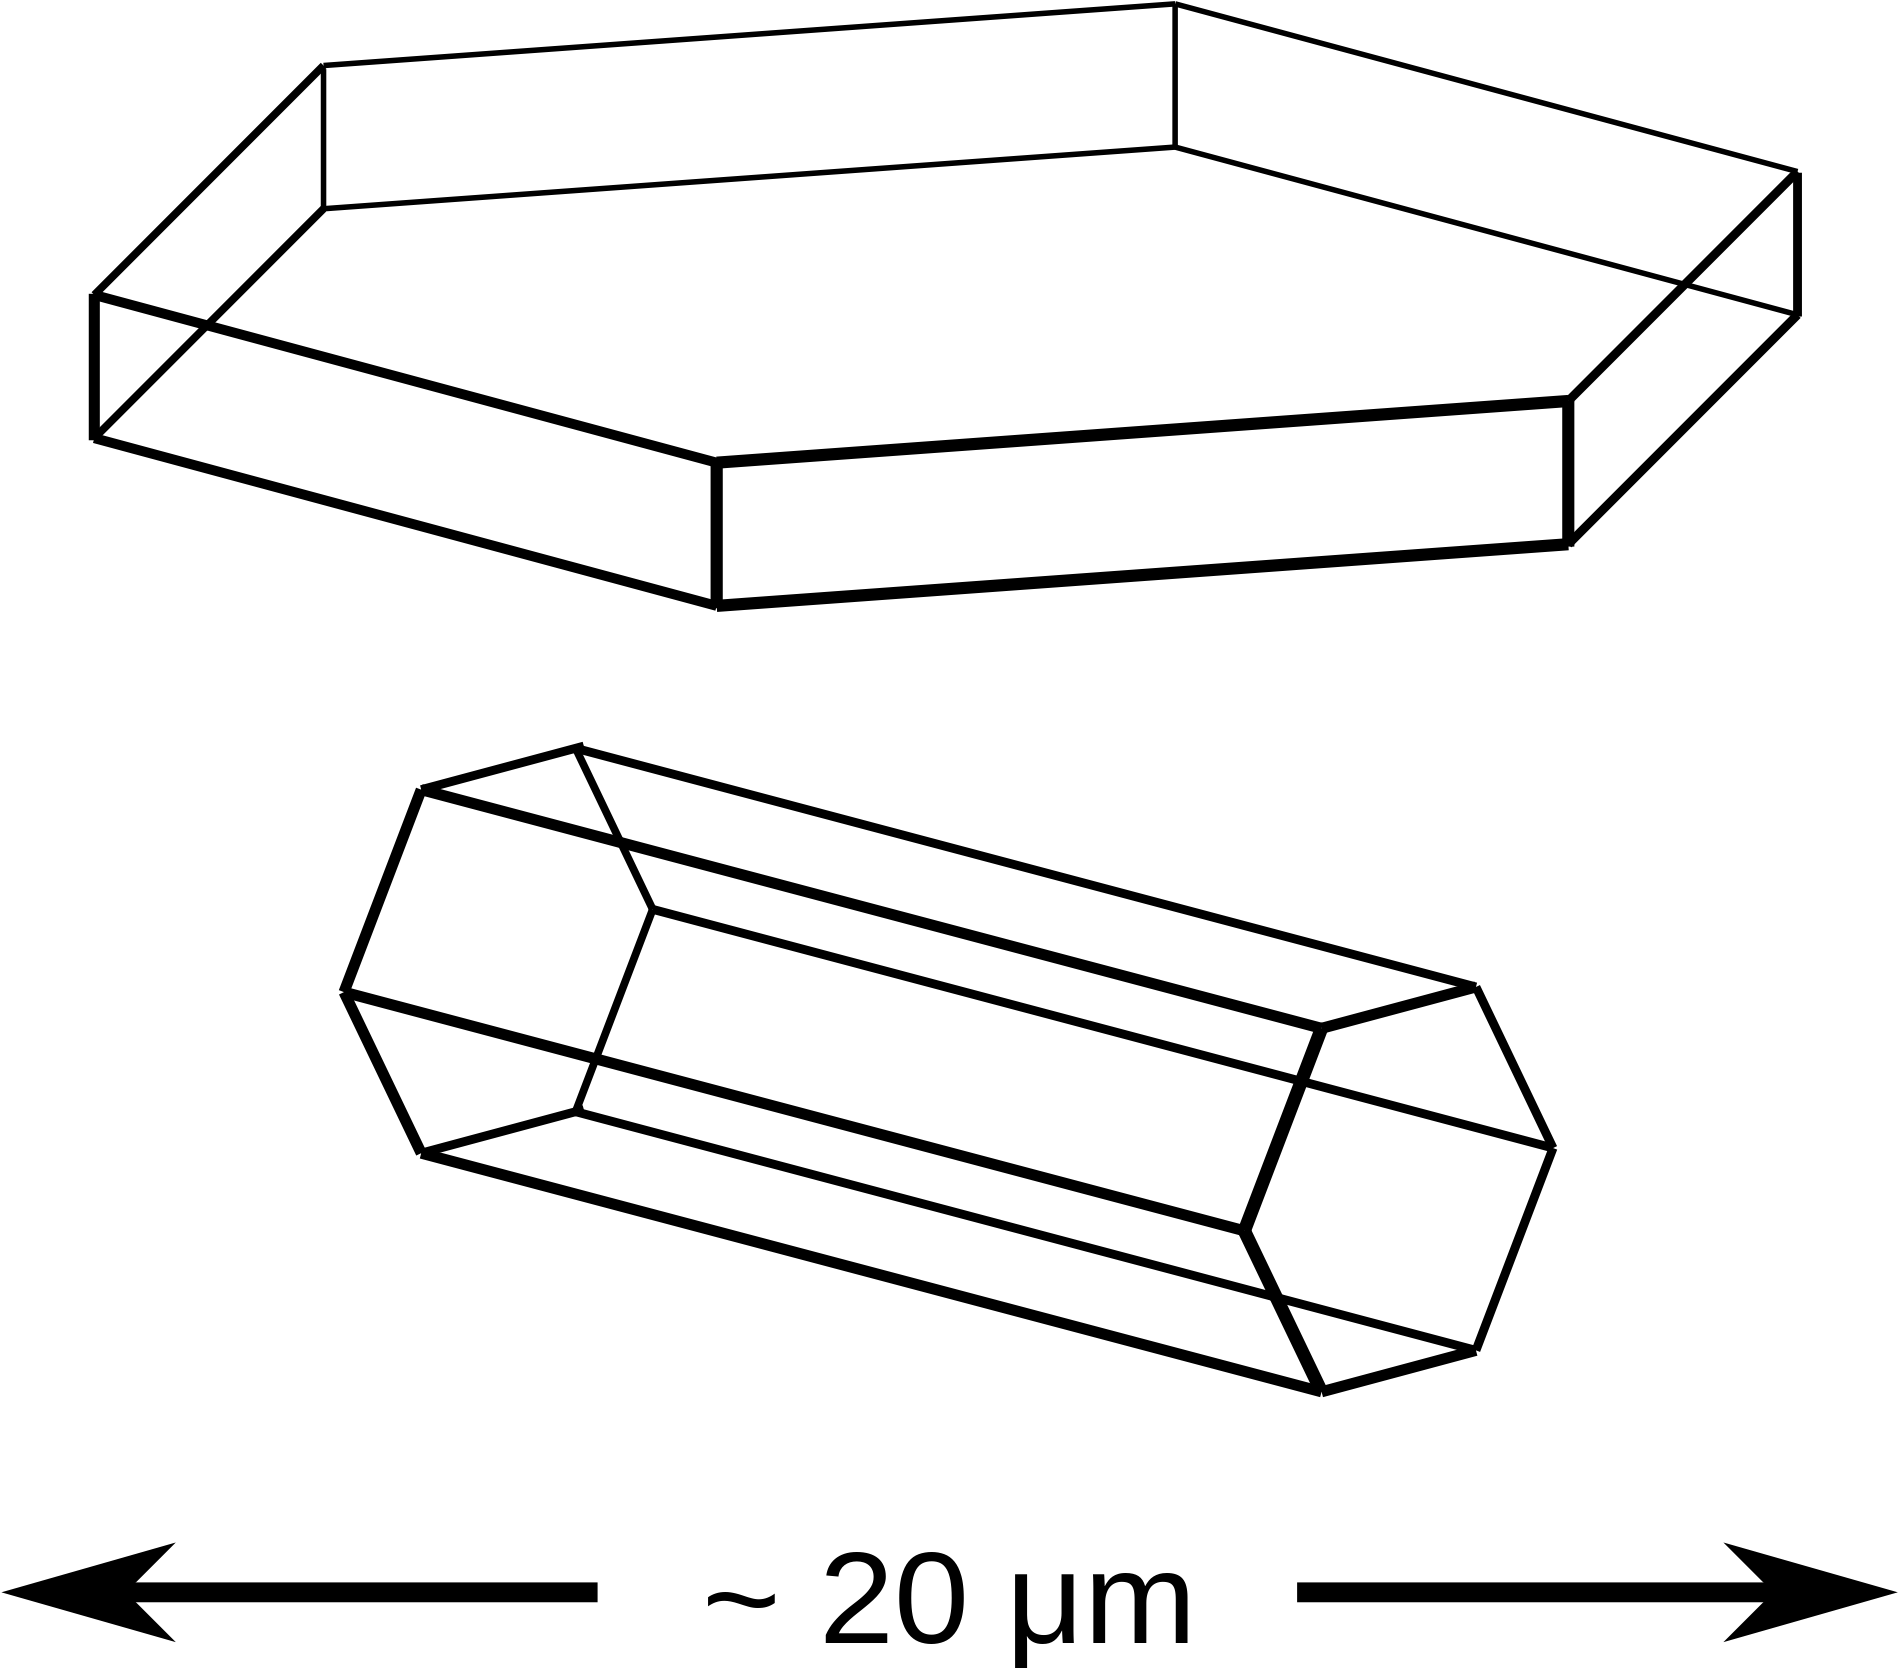 A Black Background With A Black Square PNG